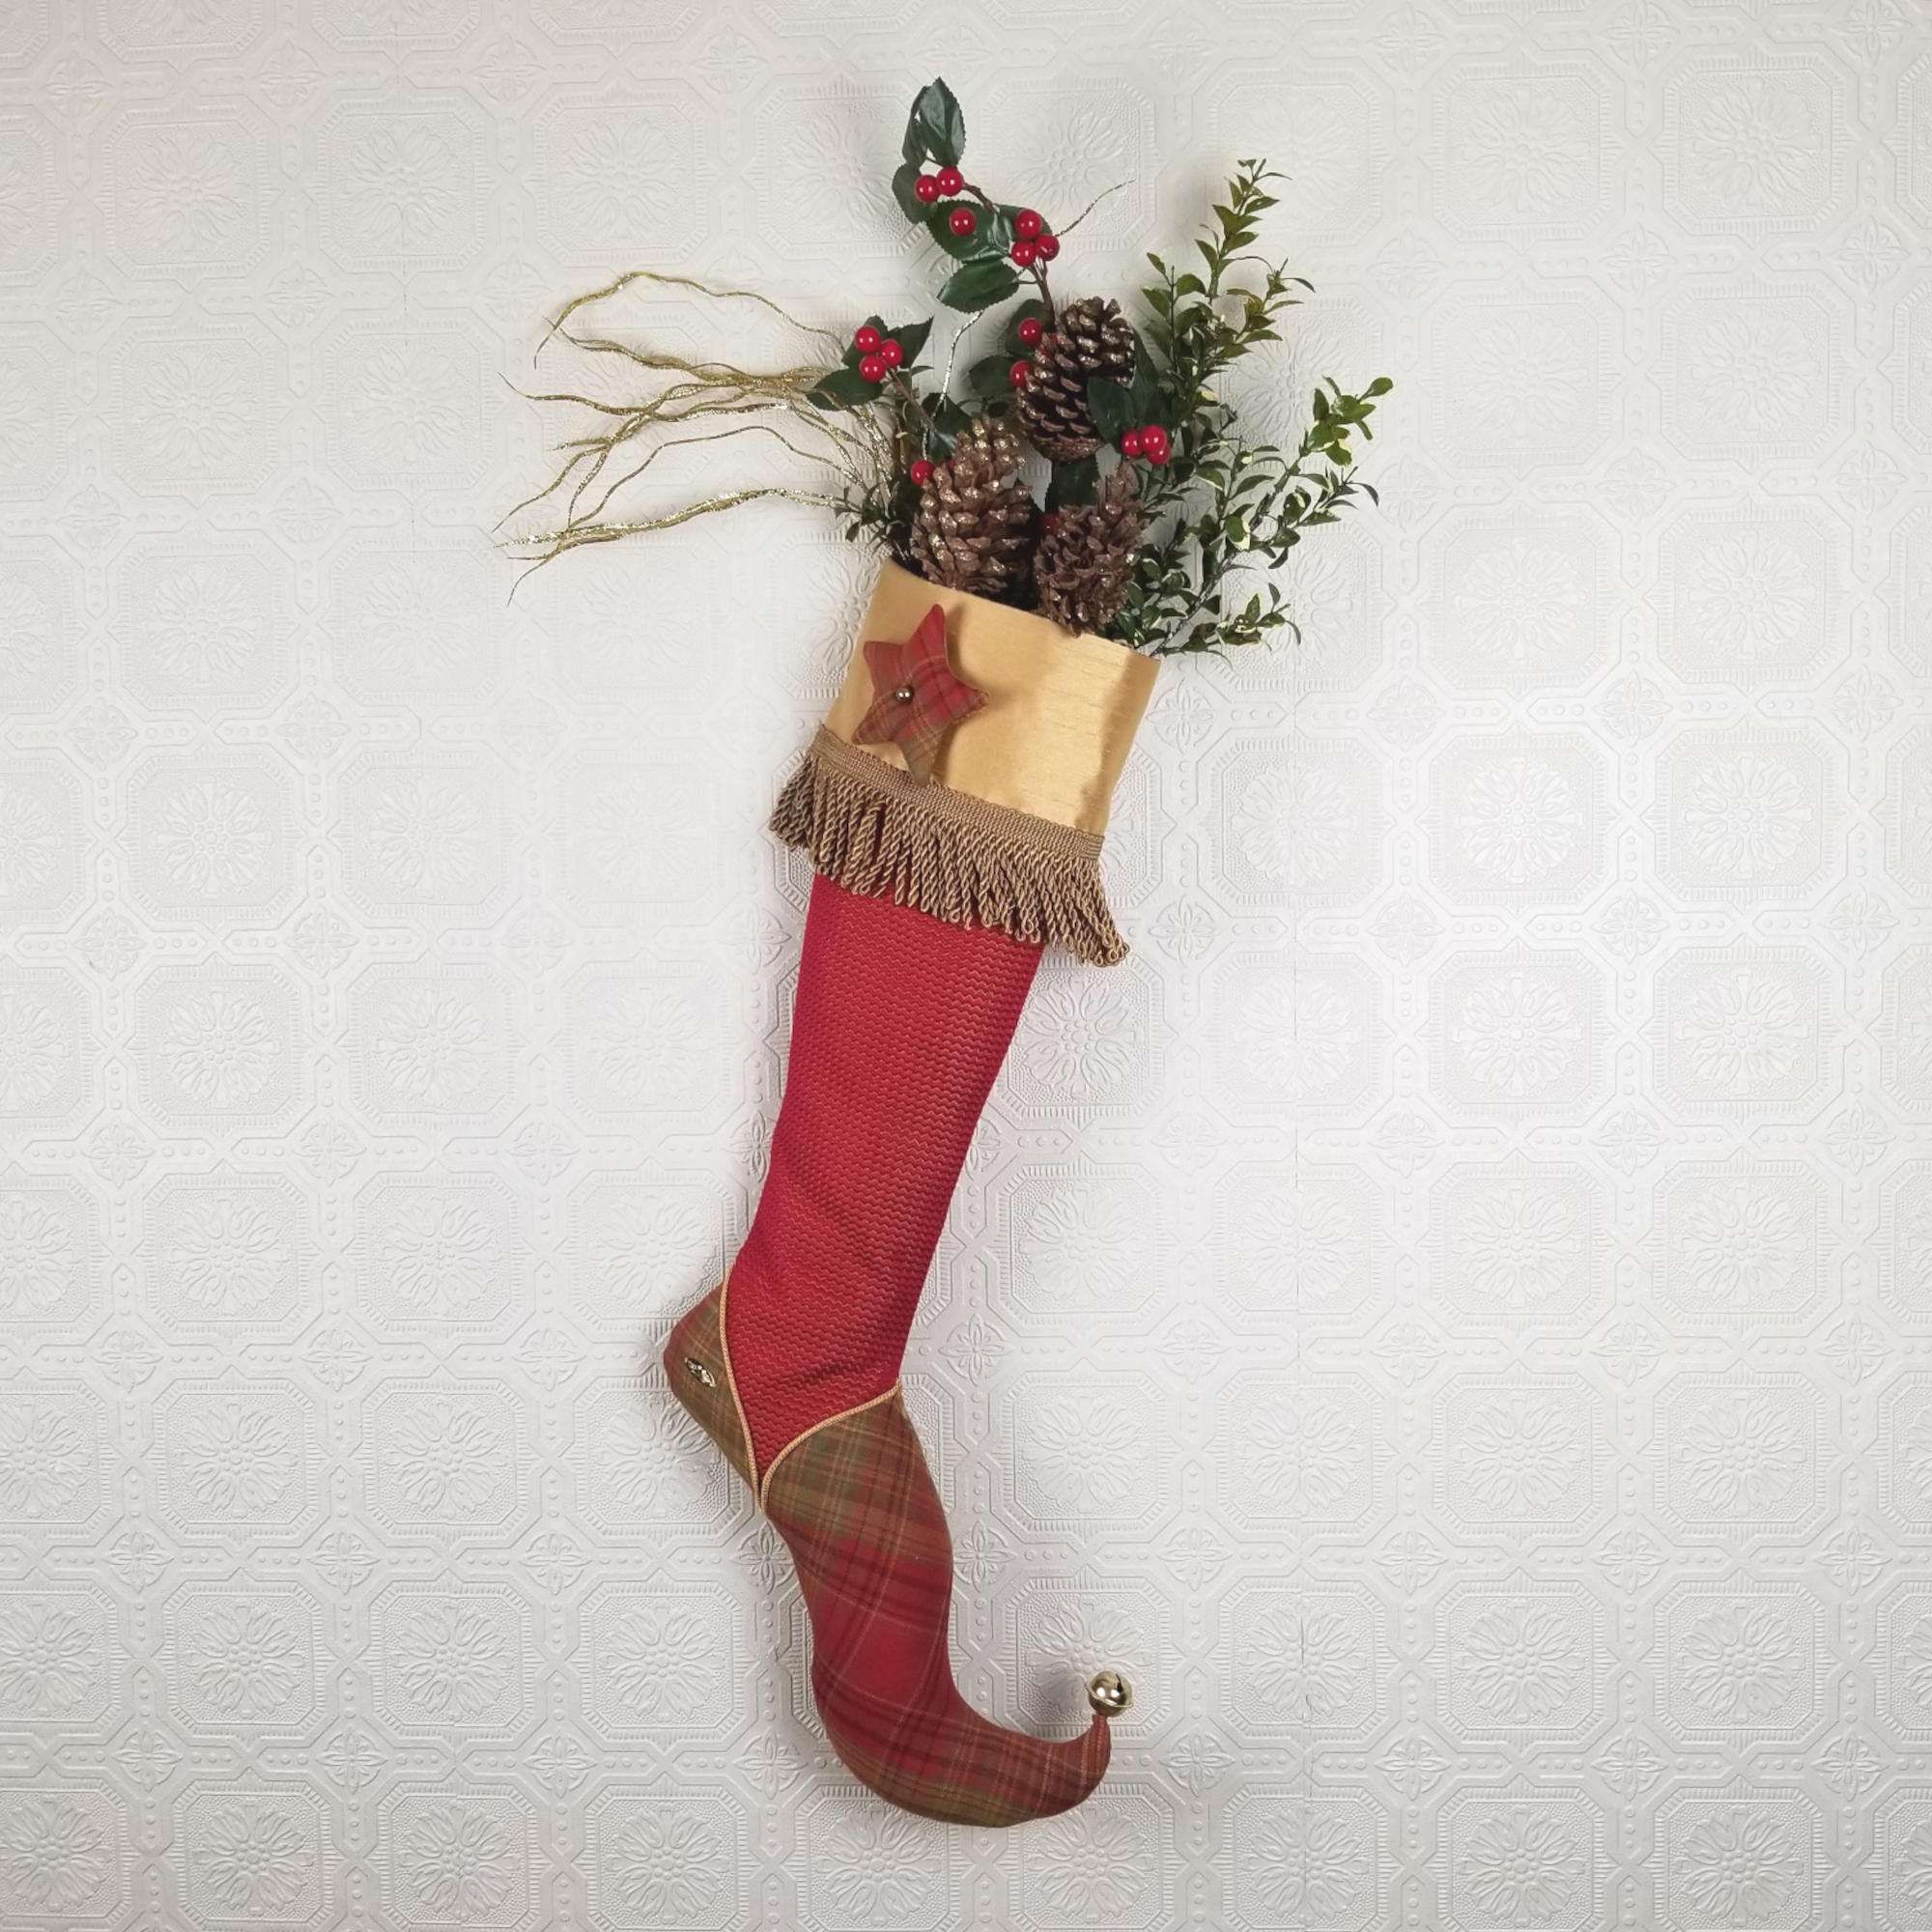 Red and gold Christmas stocking Firmin with Christmas decorations